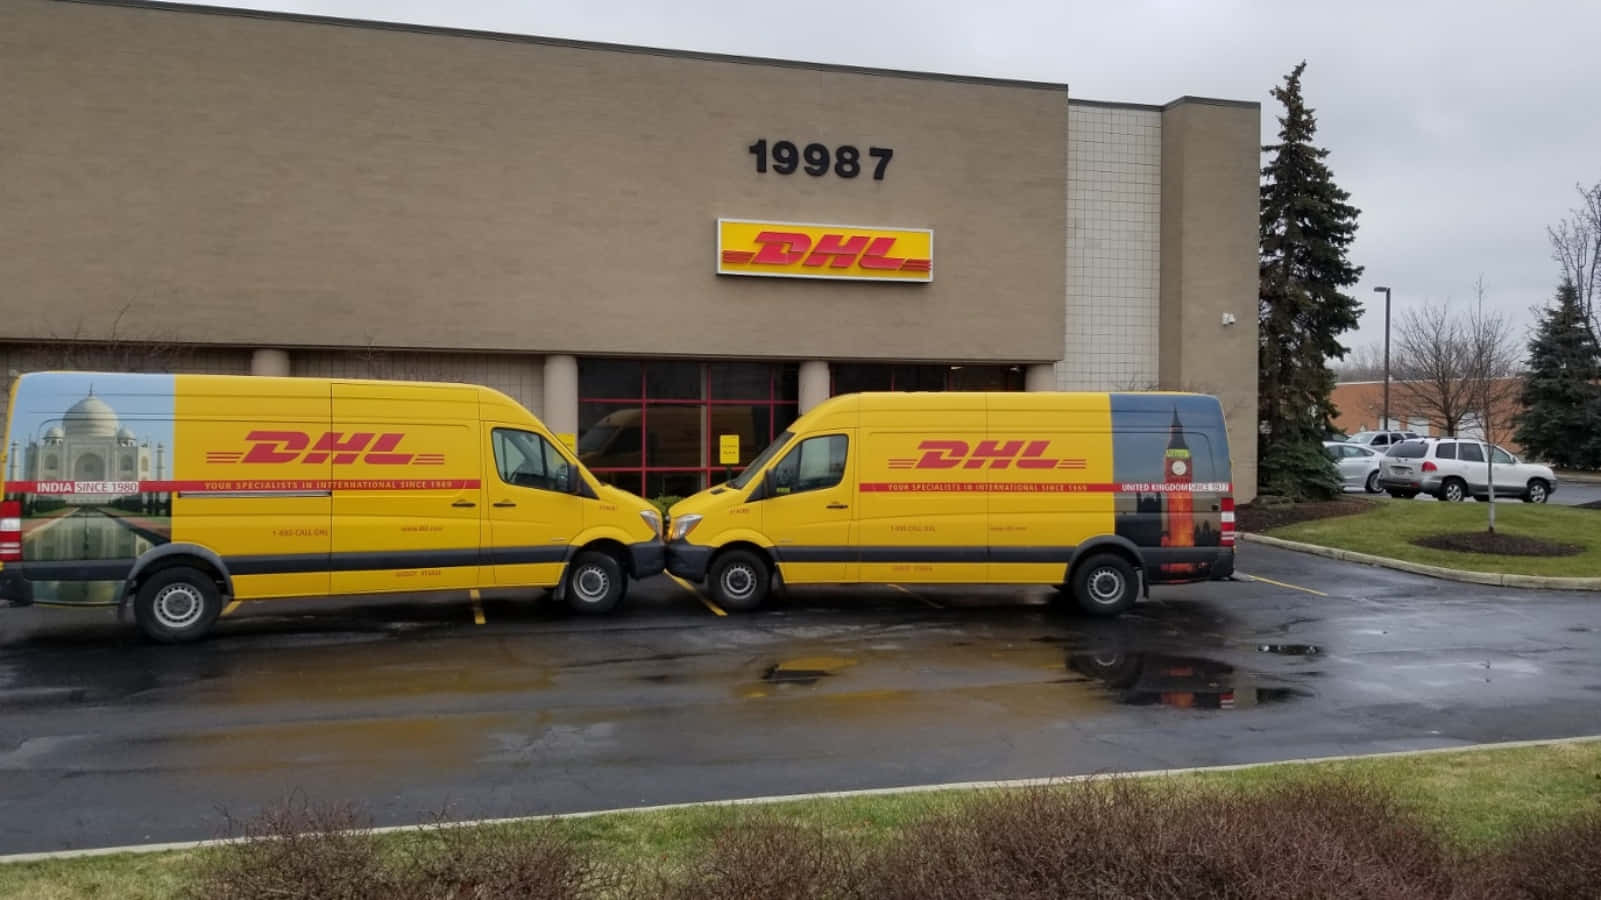 Dhl Vans Parked Outside Of A Building